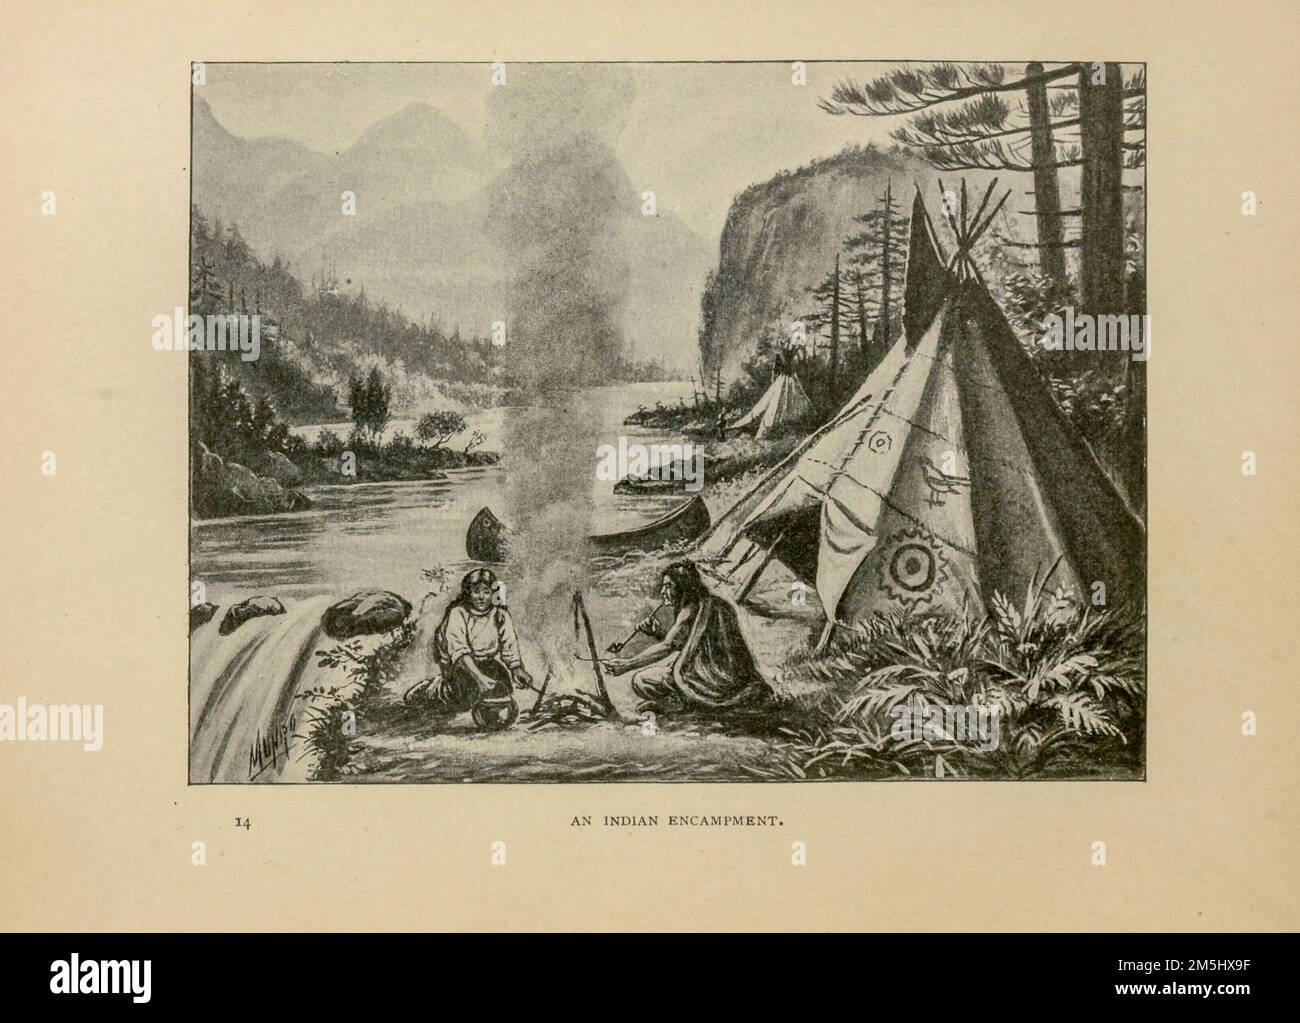 An Indian encampment illustrated by Ella Booher, From the book Hiawatha the Indian from Longfellow's Song of Hiawatha by Henry Wadsworth Longfellow, 1807-1882; Stock Photo